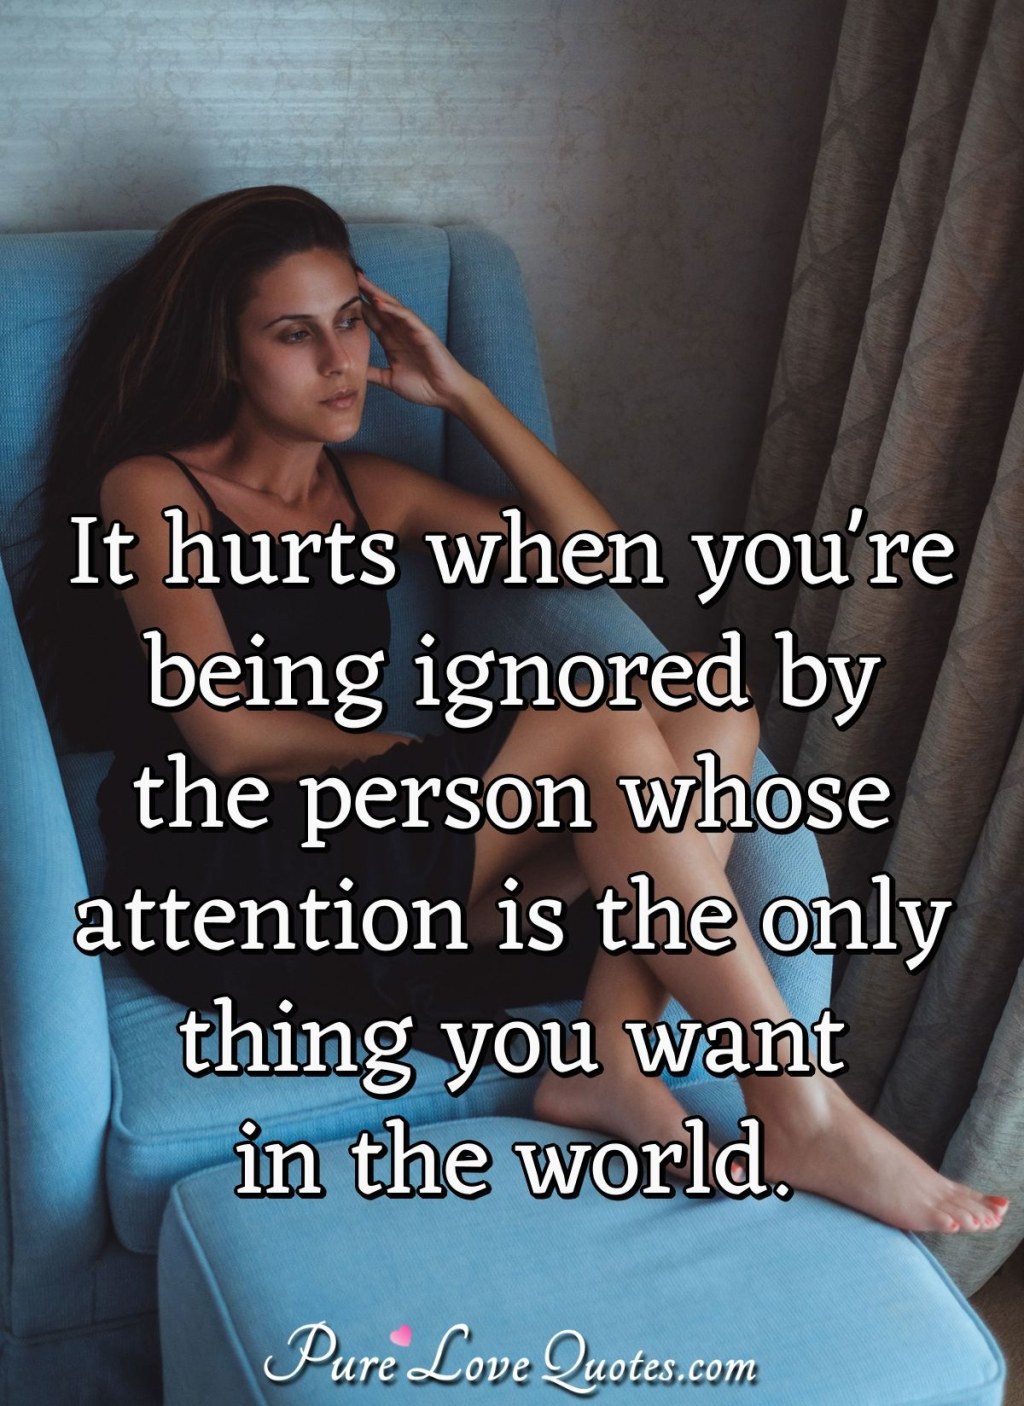 Picture of: It hurts when you’re being ignored by the person whose attention